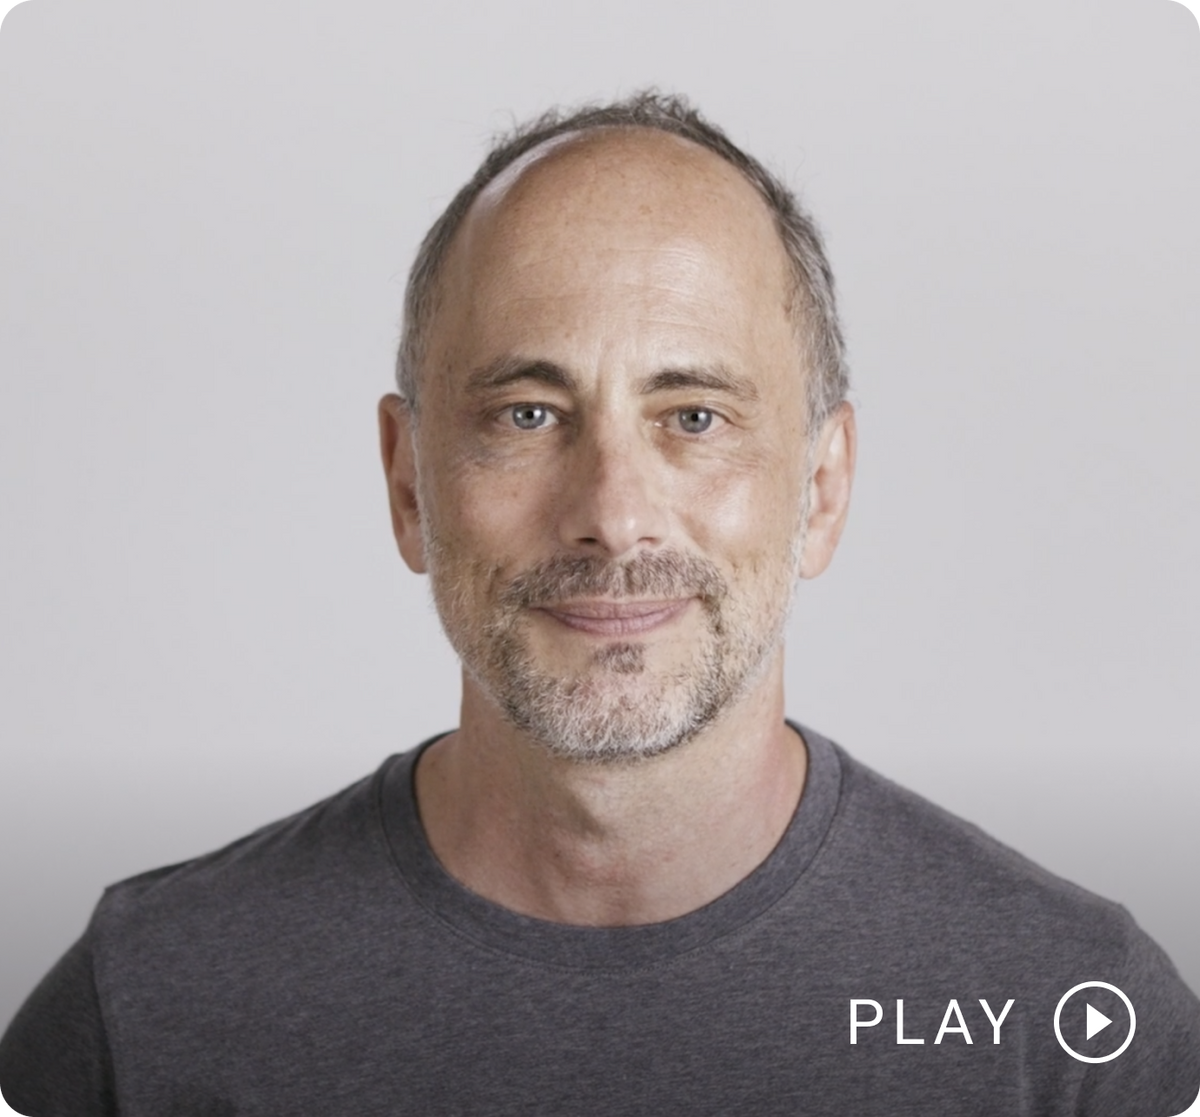 Jeff Dachis, CEO and founder of One Drop, reveals new Digital Membership video link to YouTube